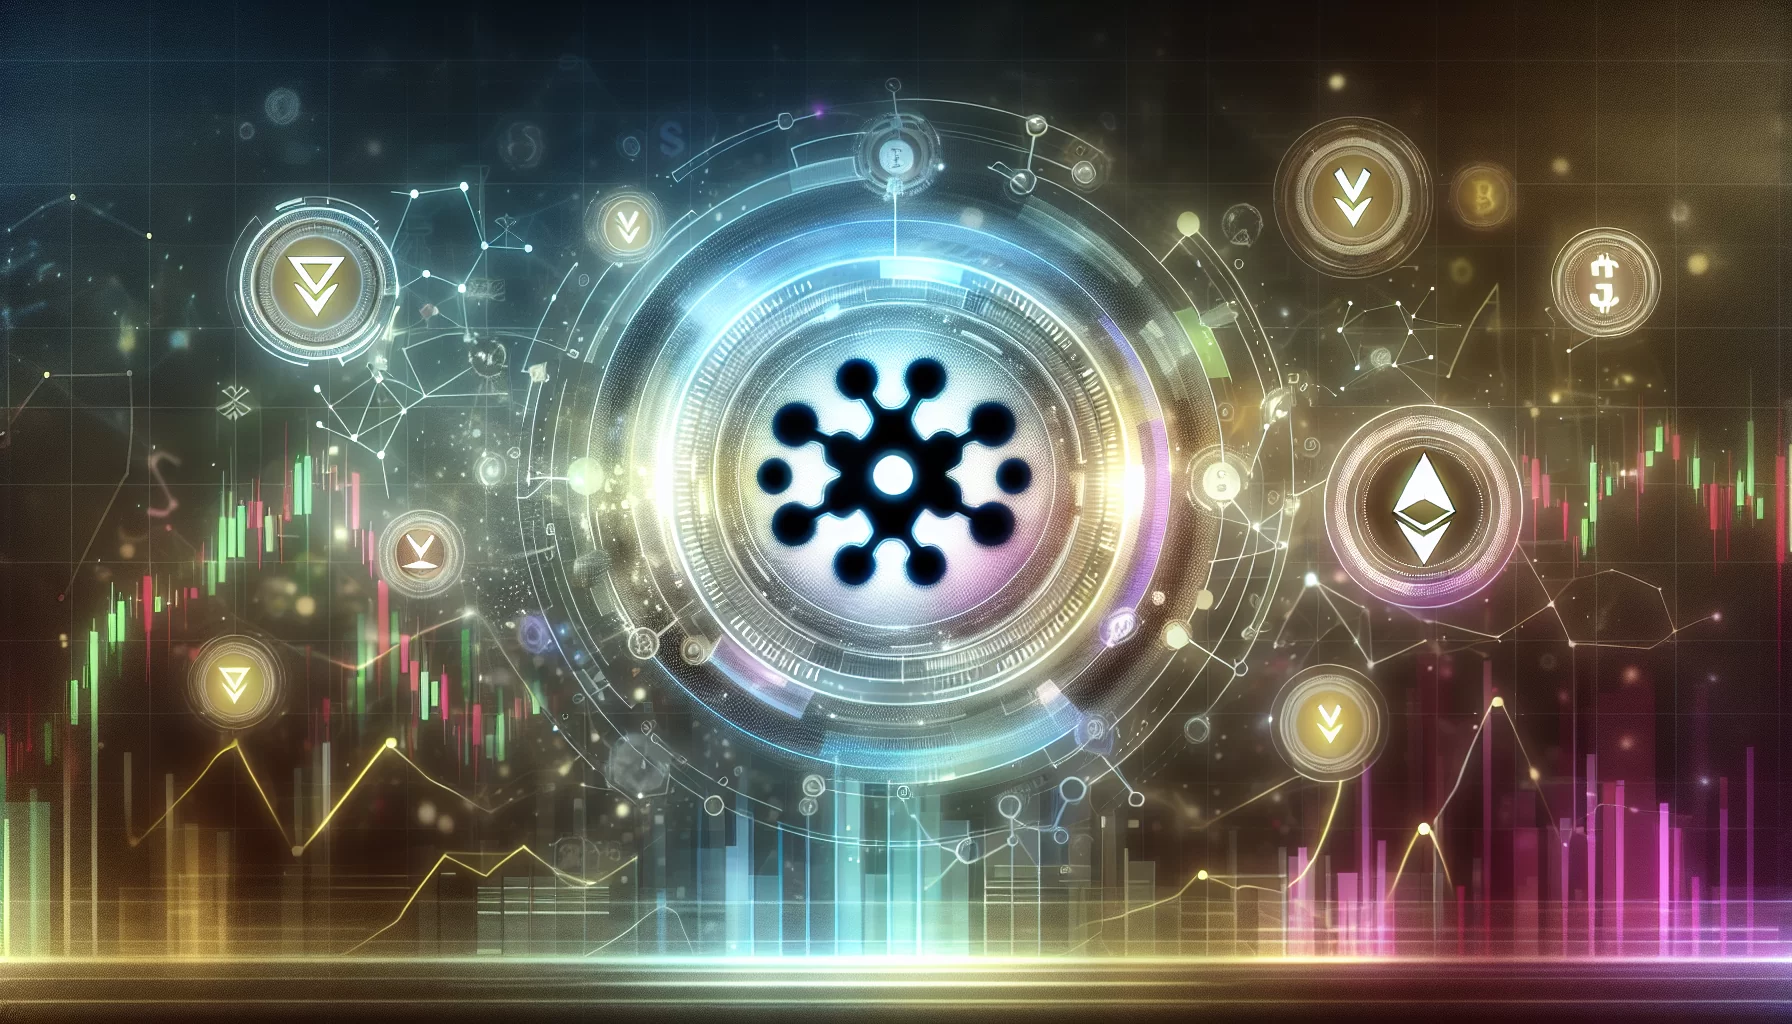 Exploring the effect of the centralization controversy around Cardano on the cryptocurrency market